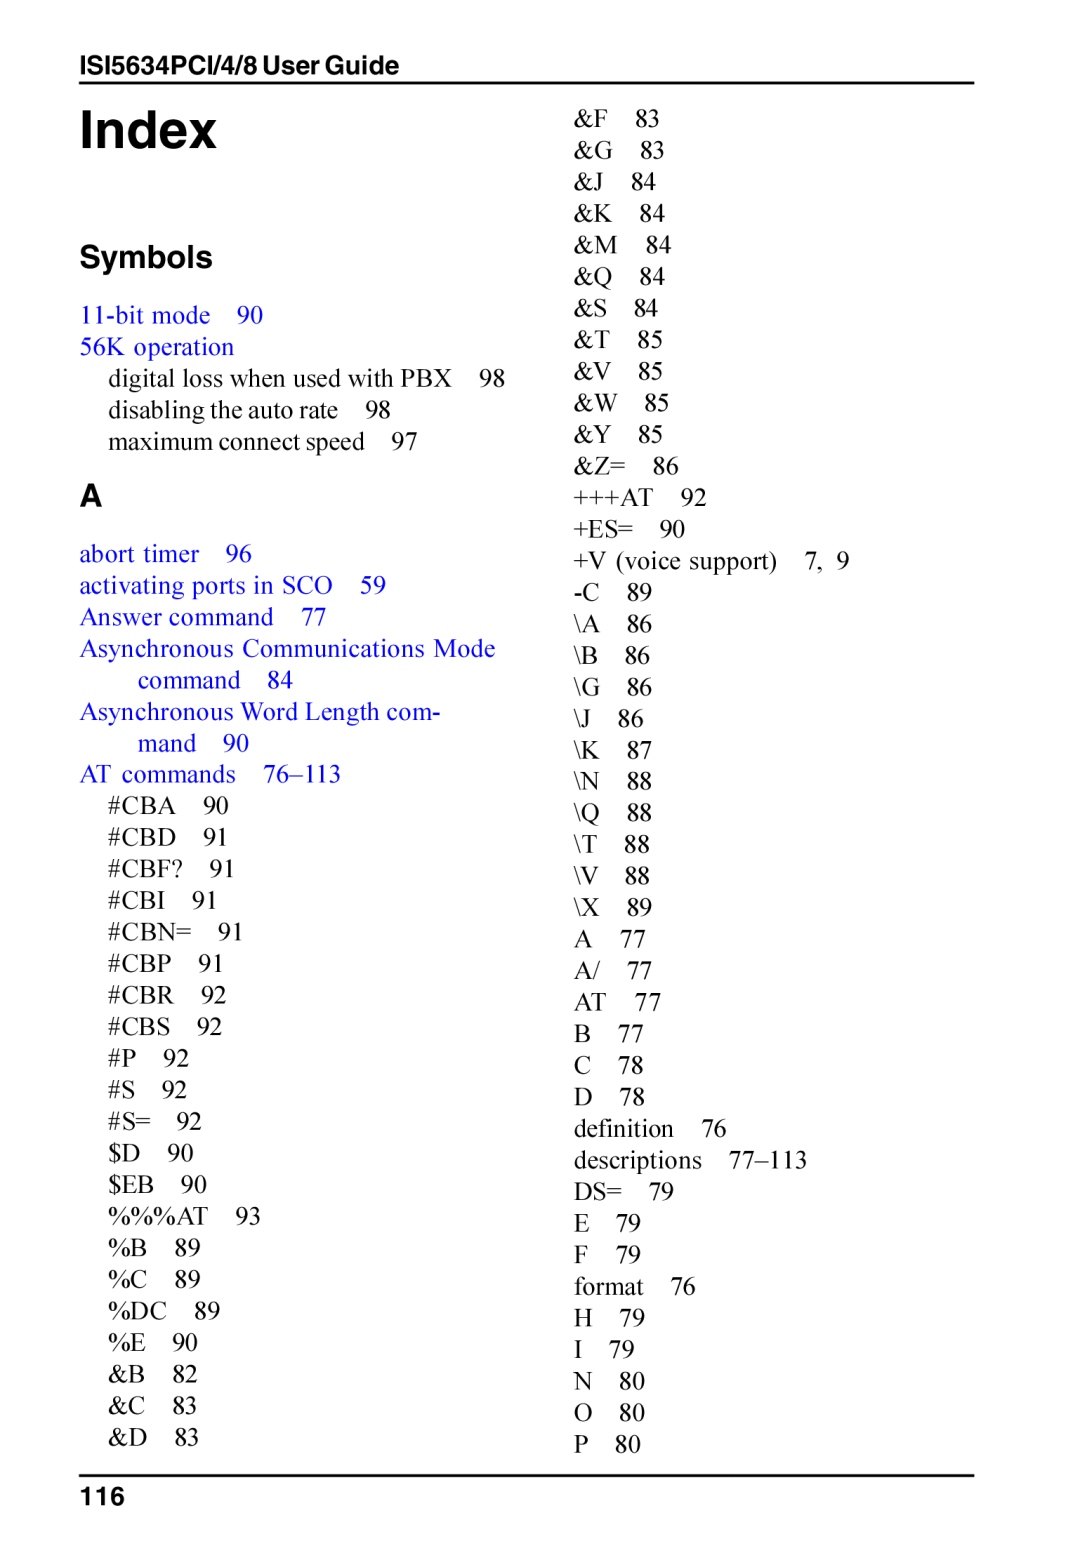 Multi-Tech Systems manual Index, Symbols, ISI5634PCI/4/8 User Guide 